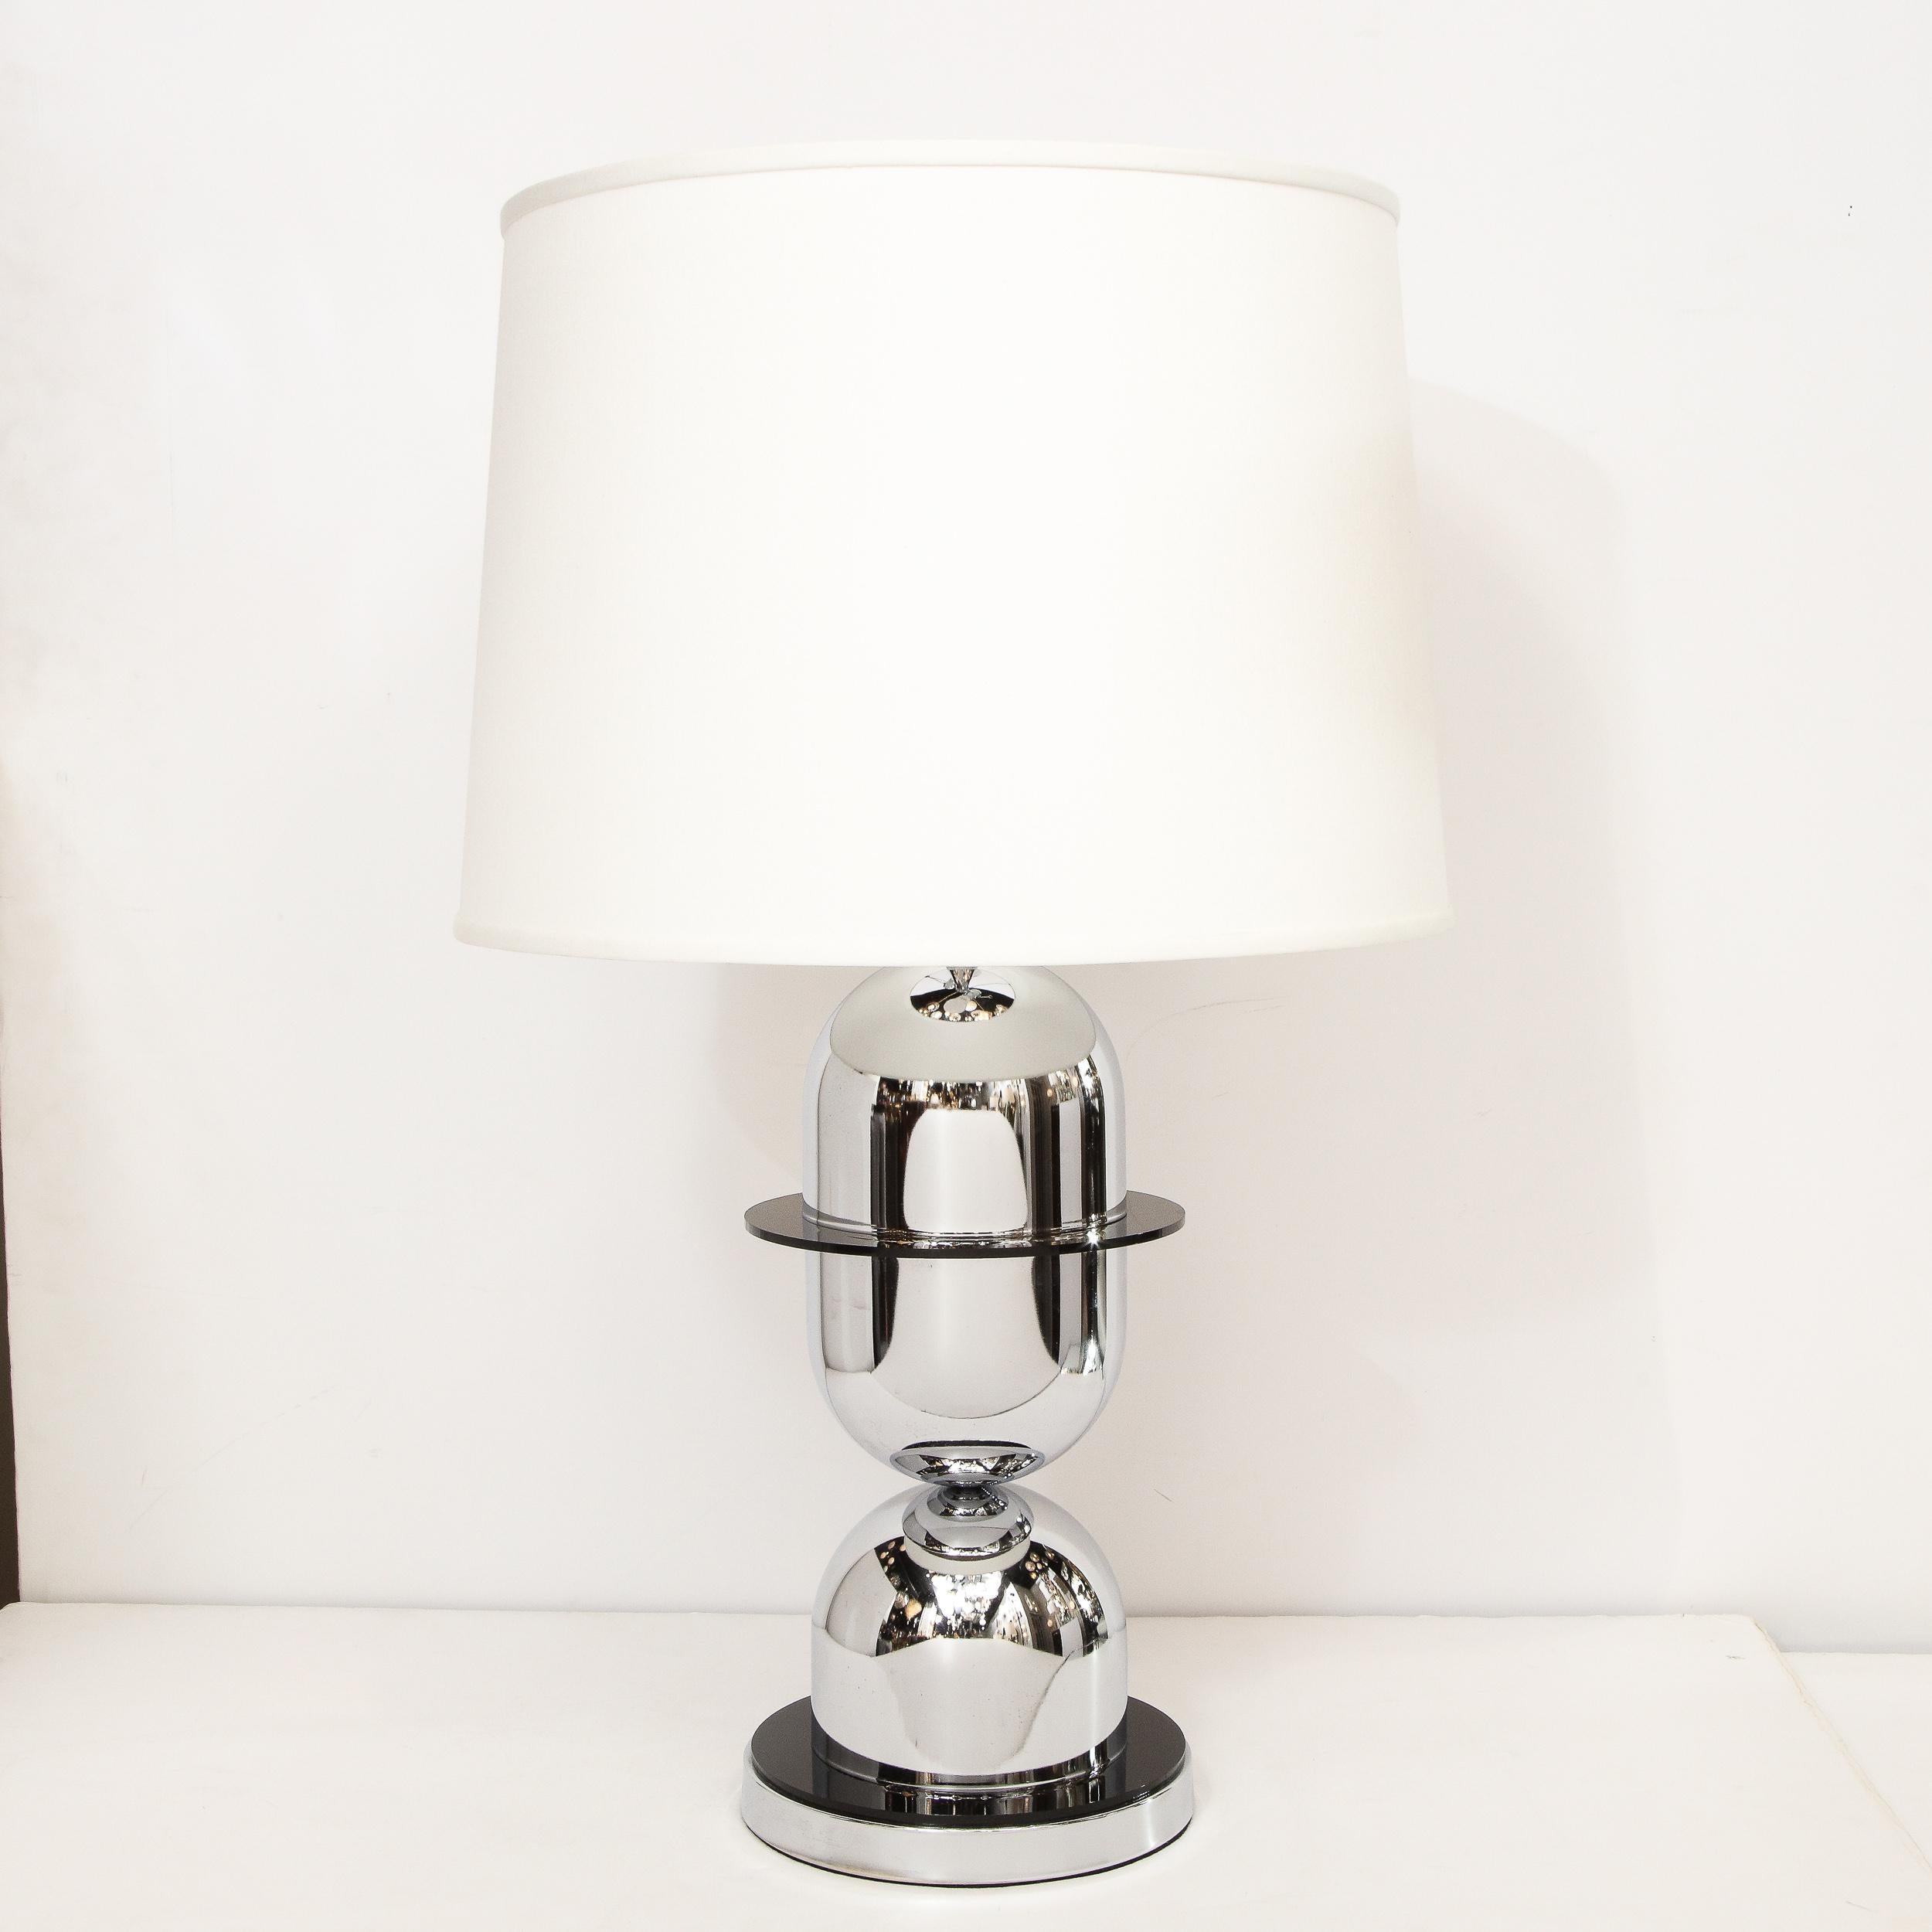 American Pair of Mid-Century Modern Ringed Polished Chrome and Black Resin Table Lamps